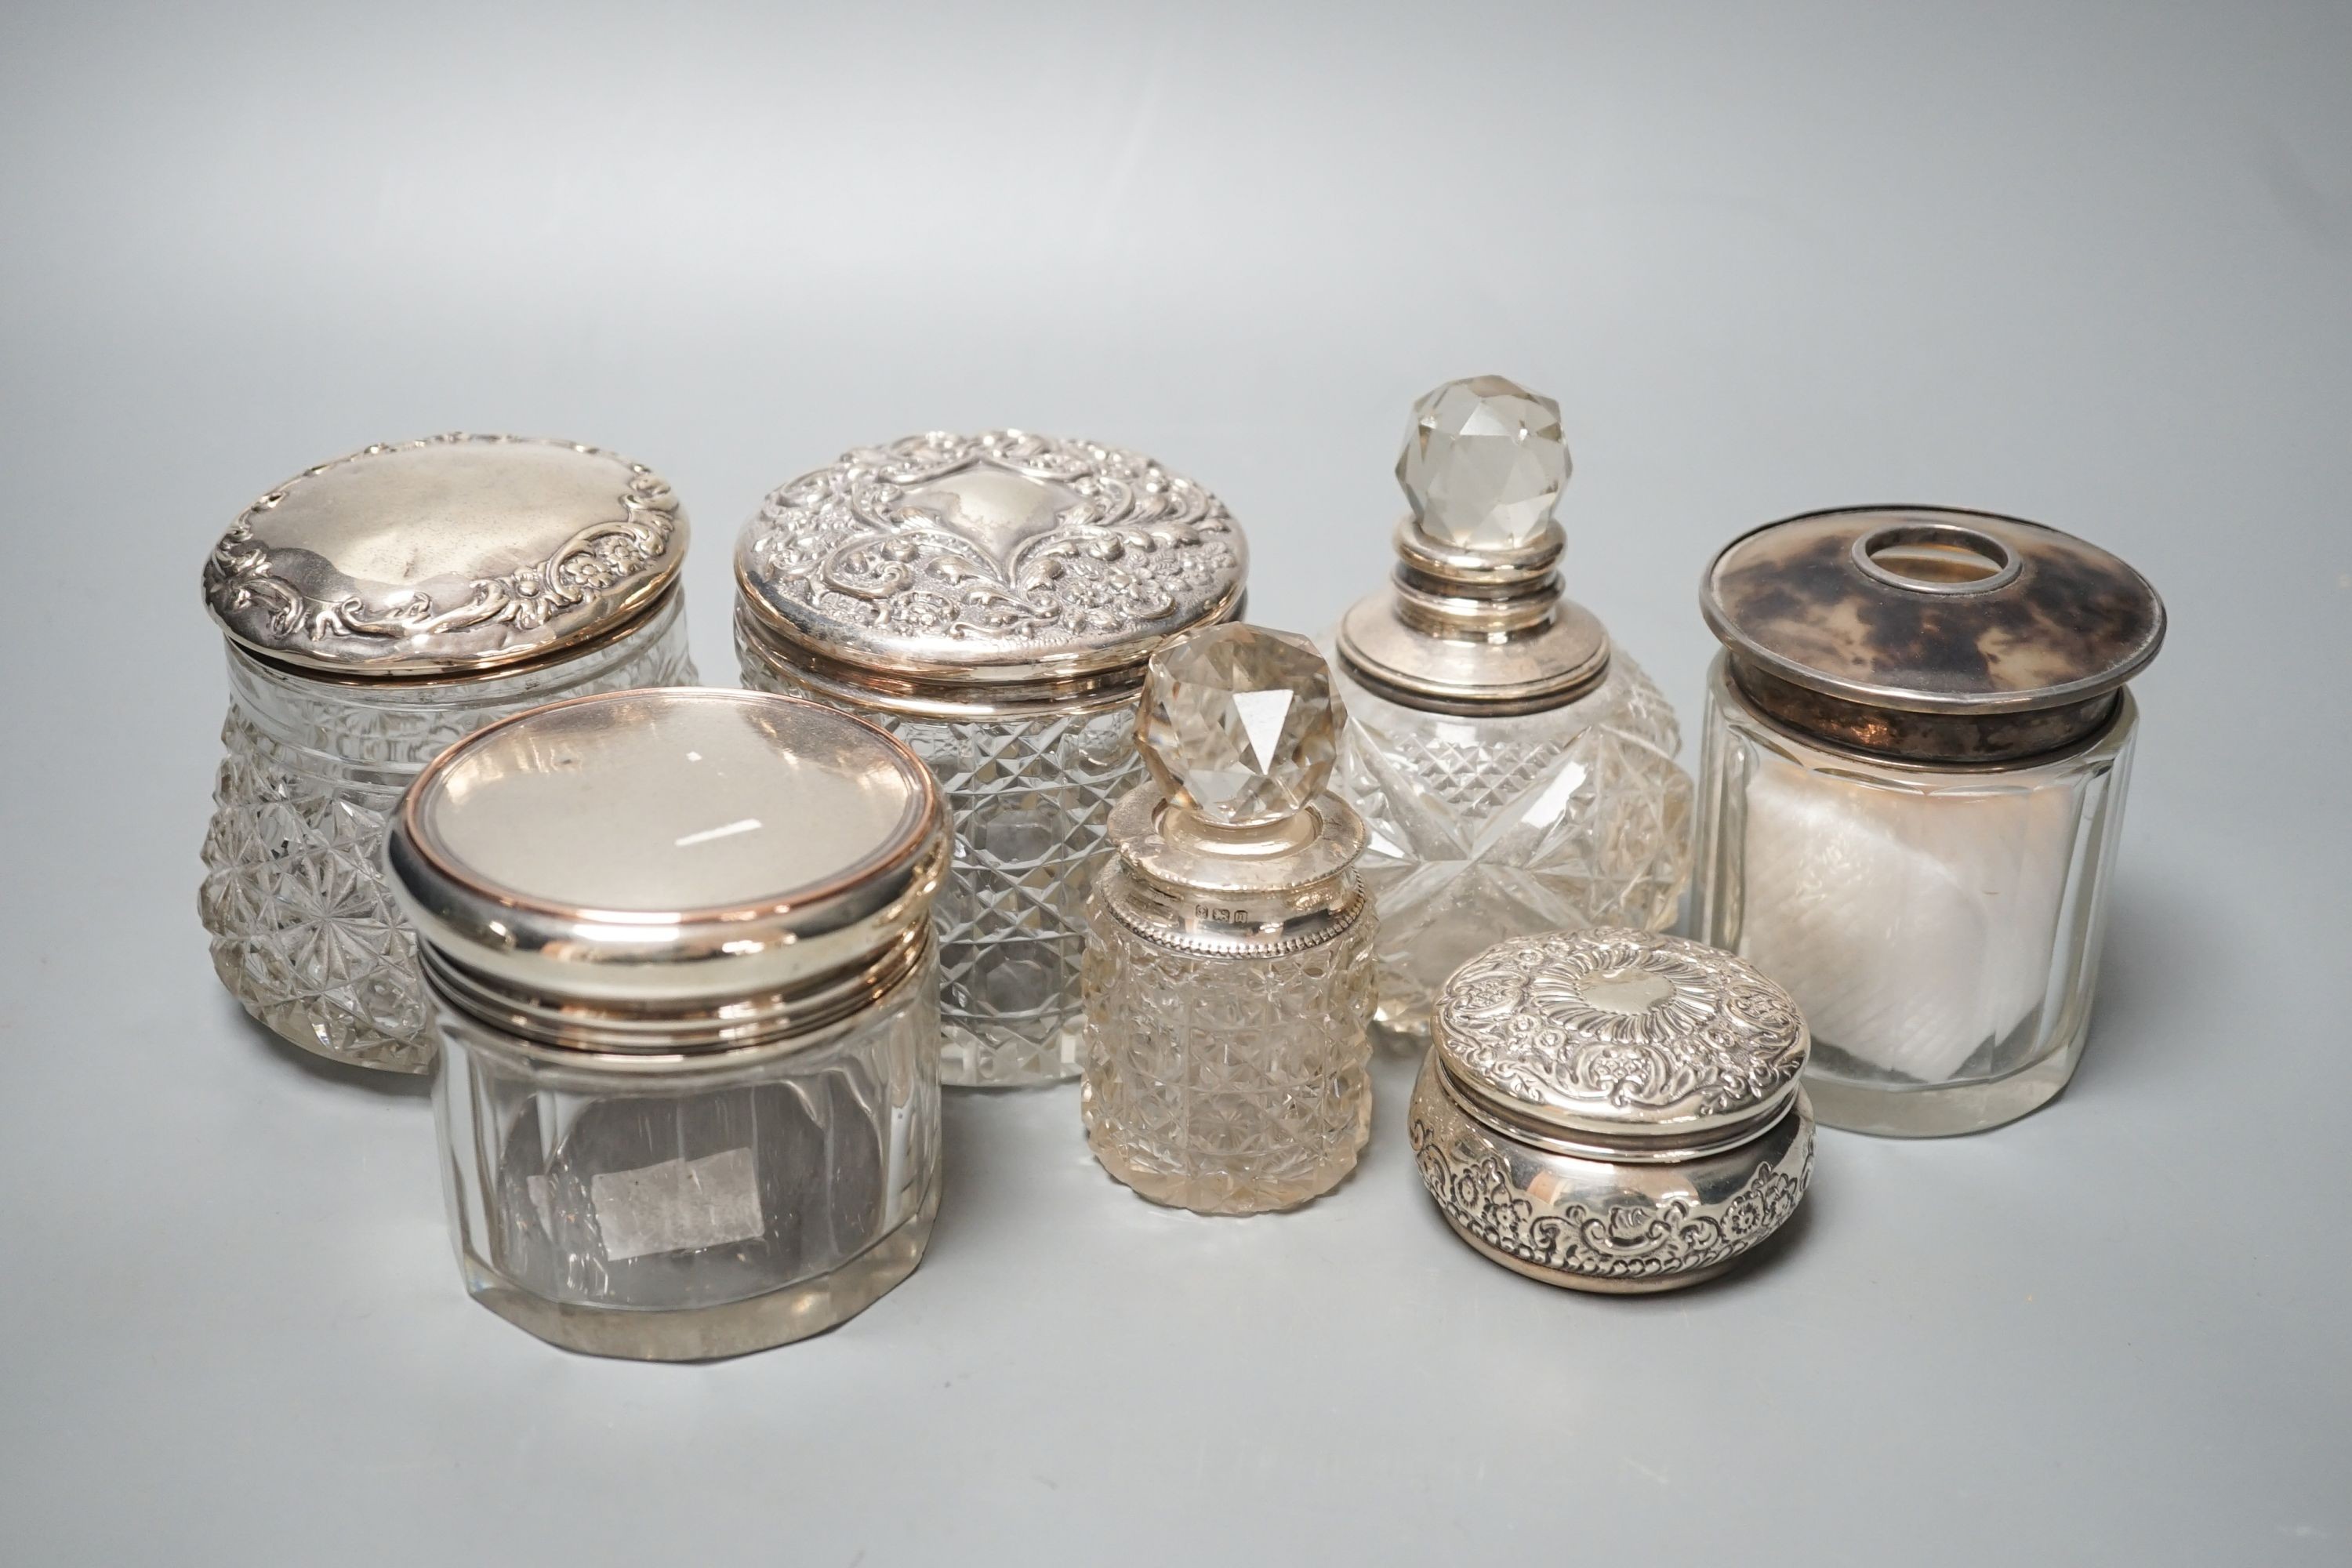 A circular embossed silver box and six silver mounted glass toilet bottles.